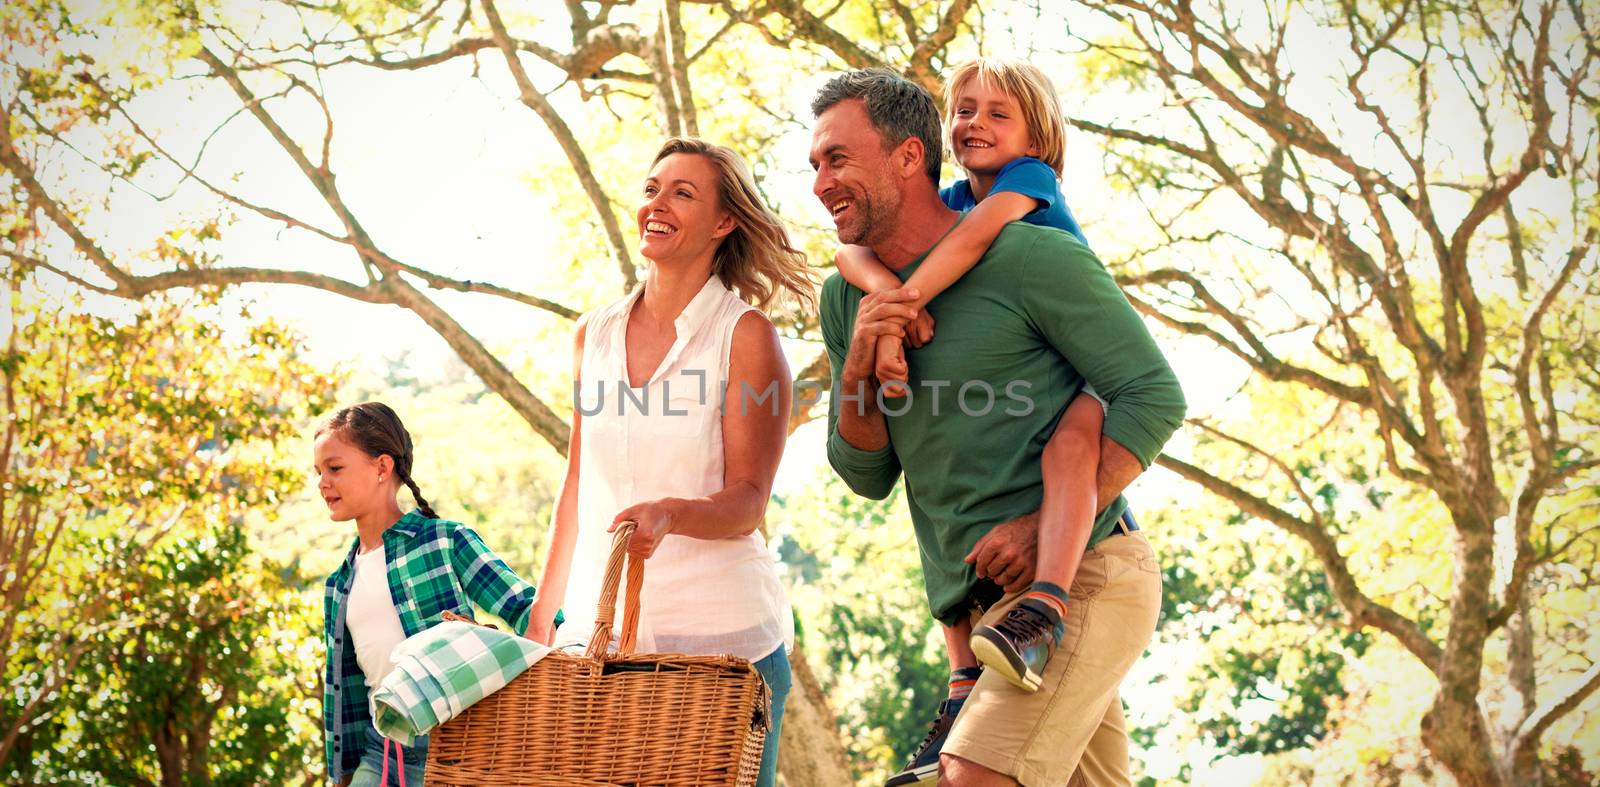 Family arriving in the park for picnic on a sunny day by Wavebreakmedia